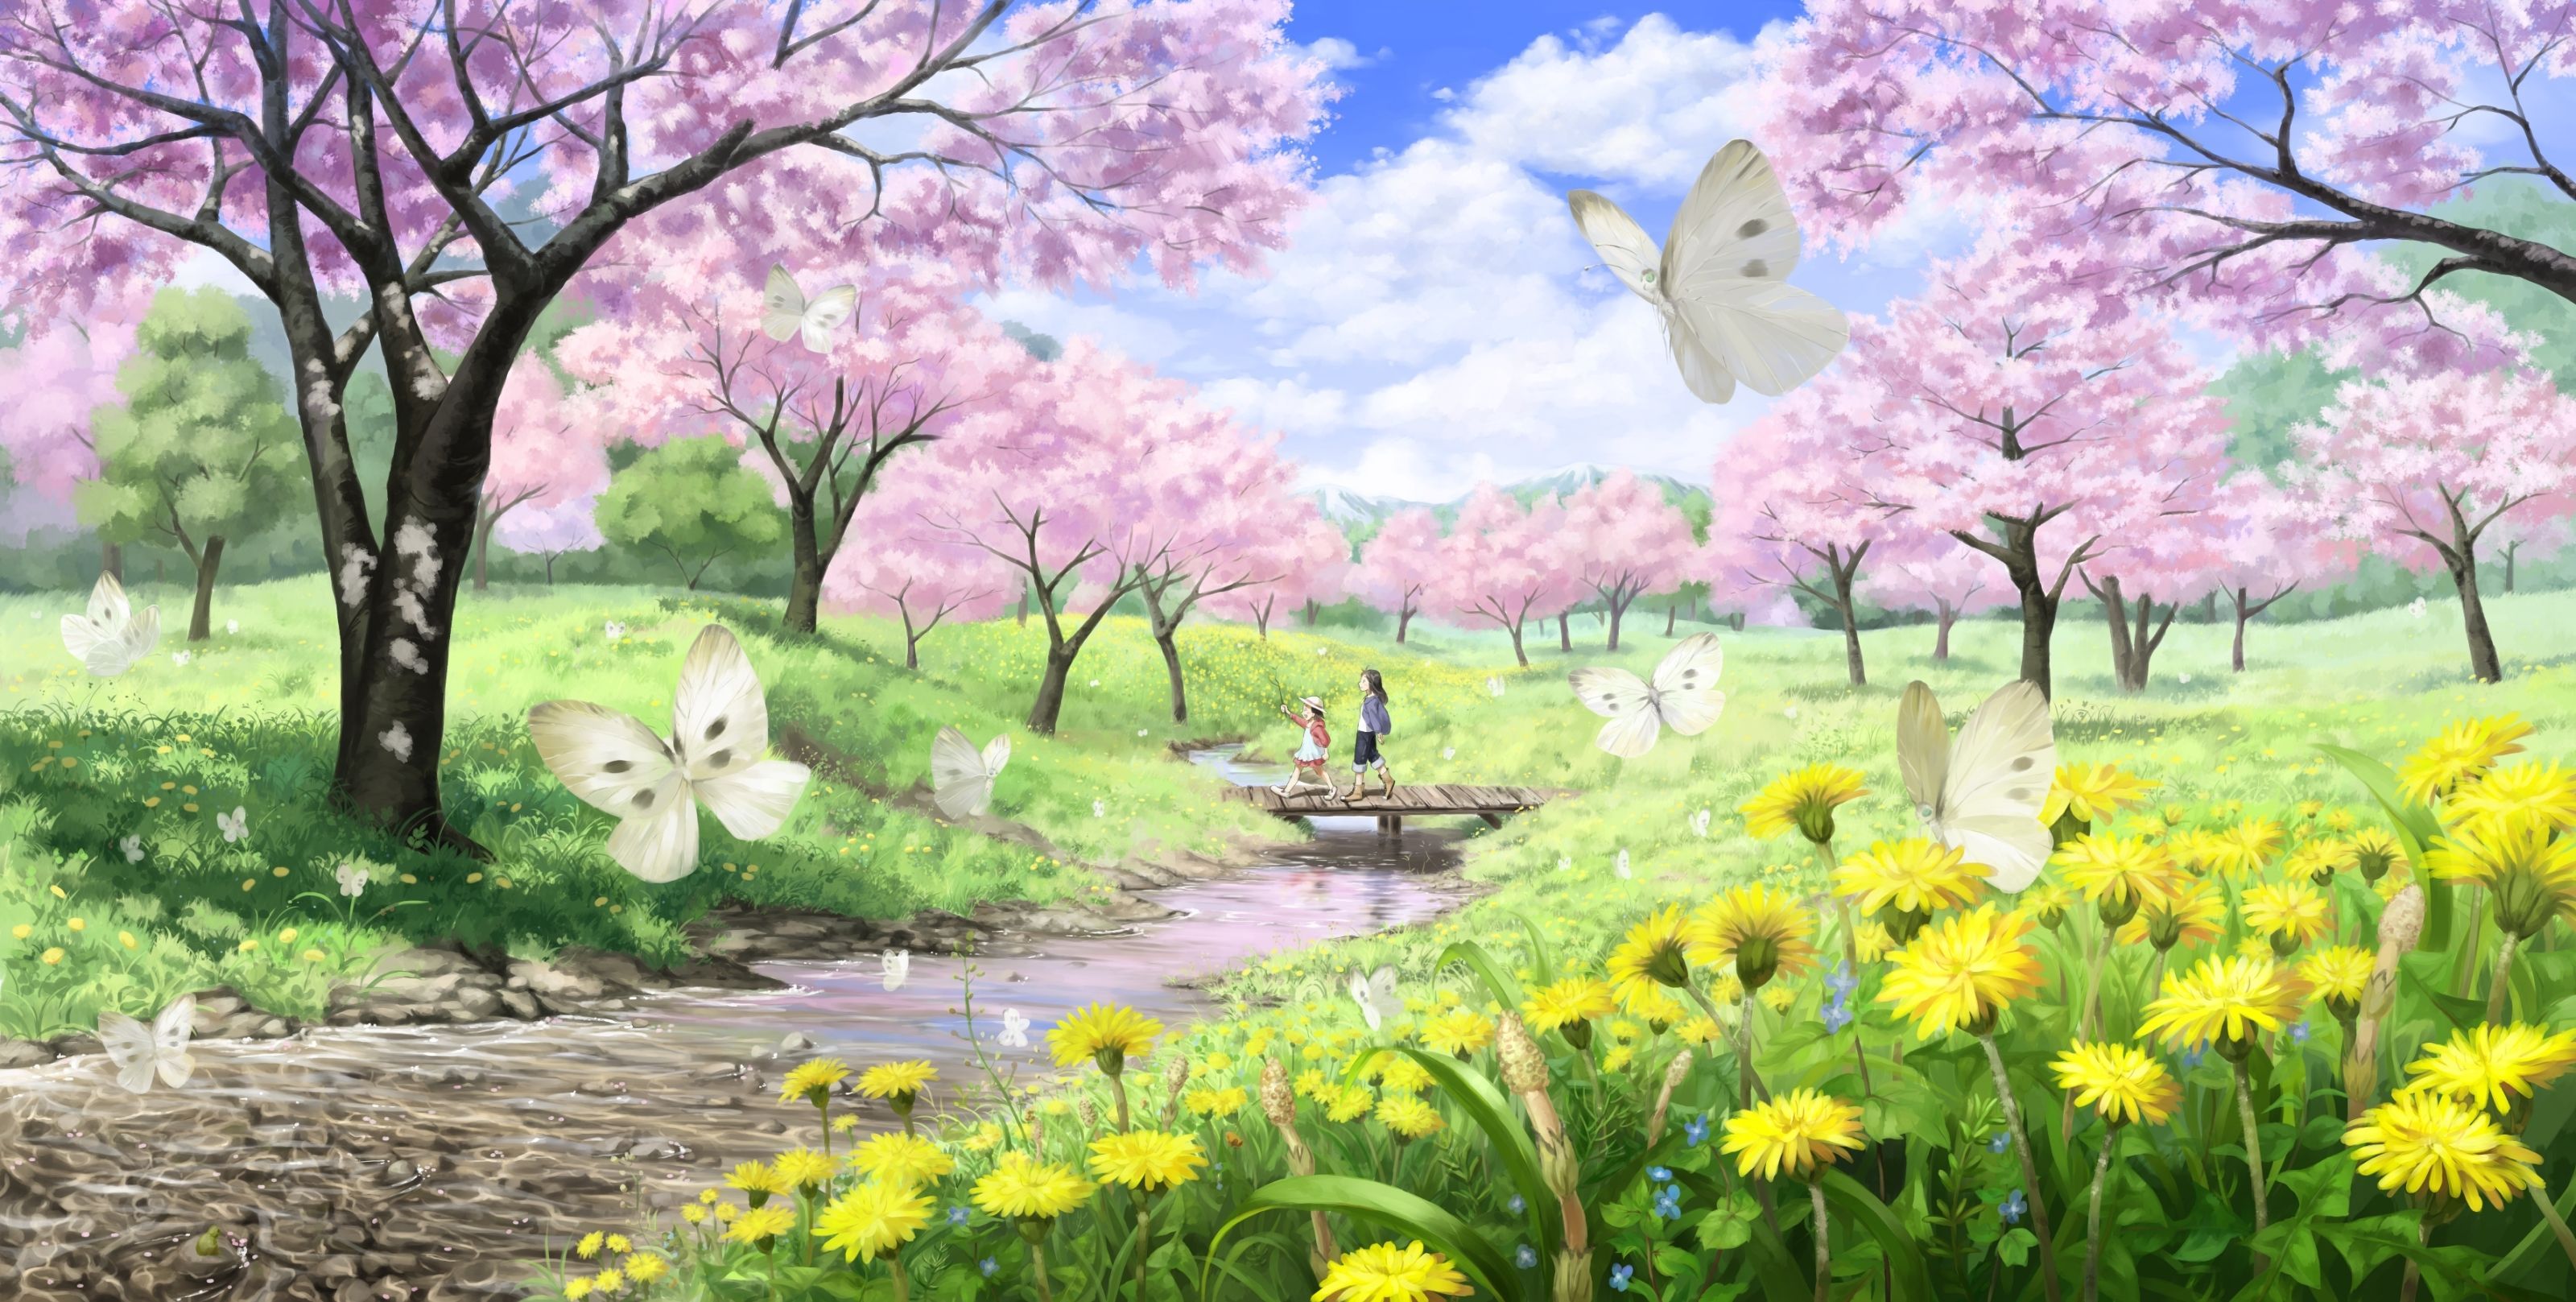 A beautiful anime scenery with cherry blossoms, butterflies, and a stream. - Spring